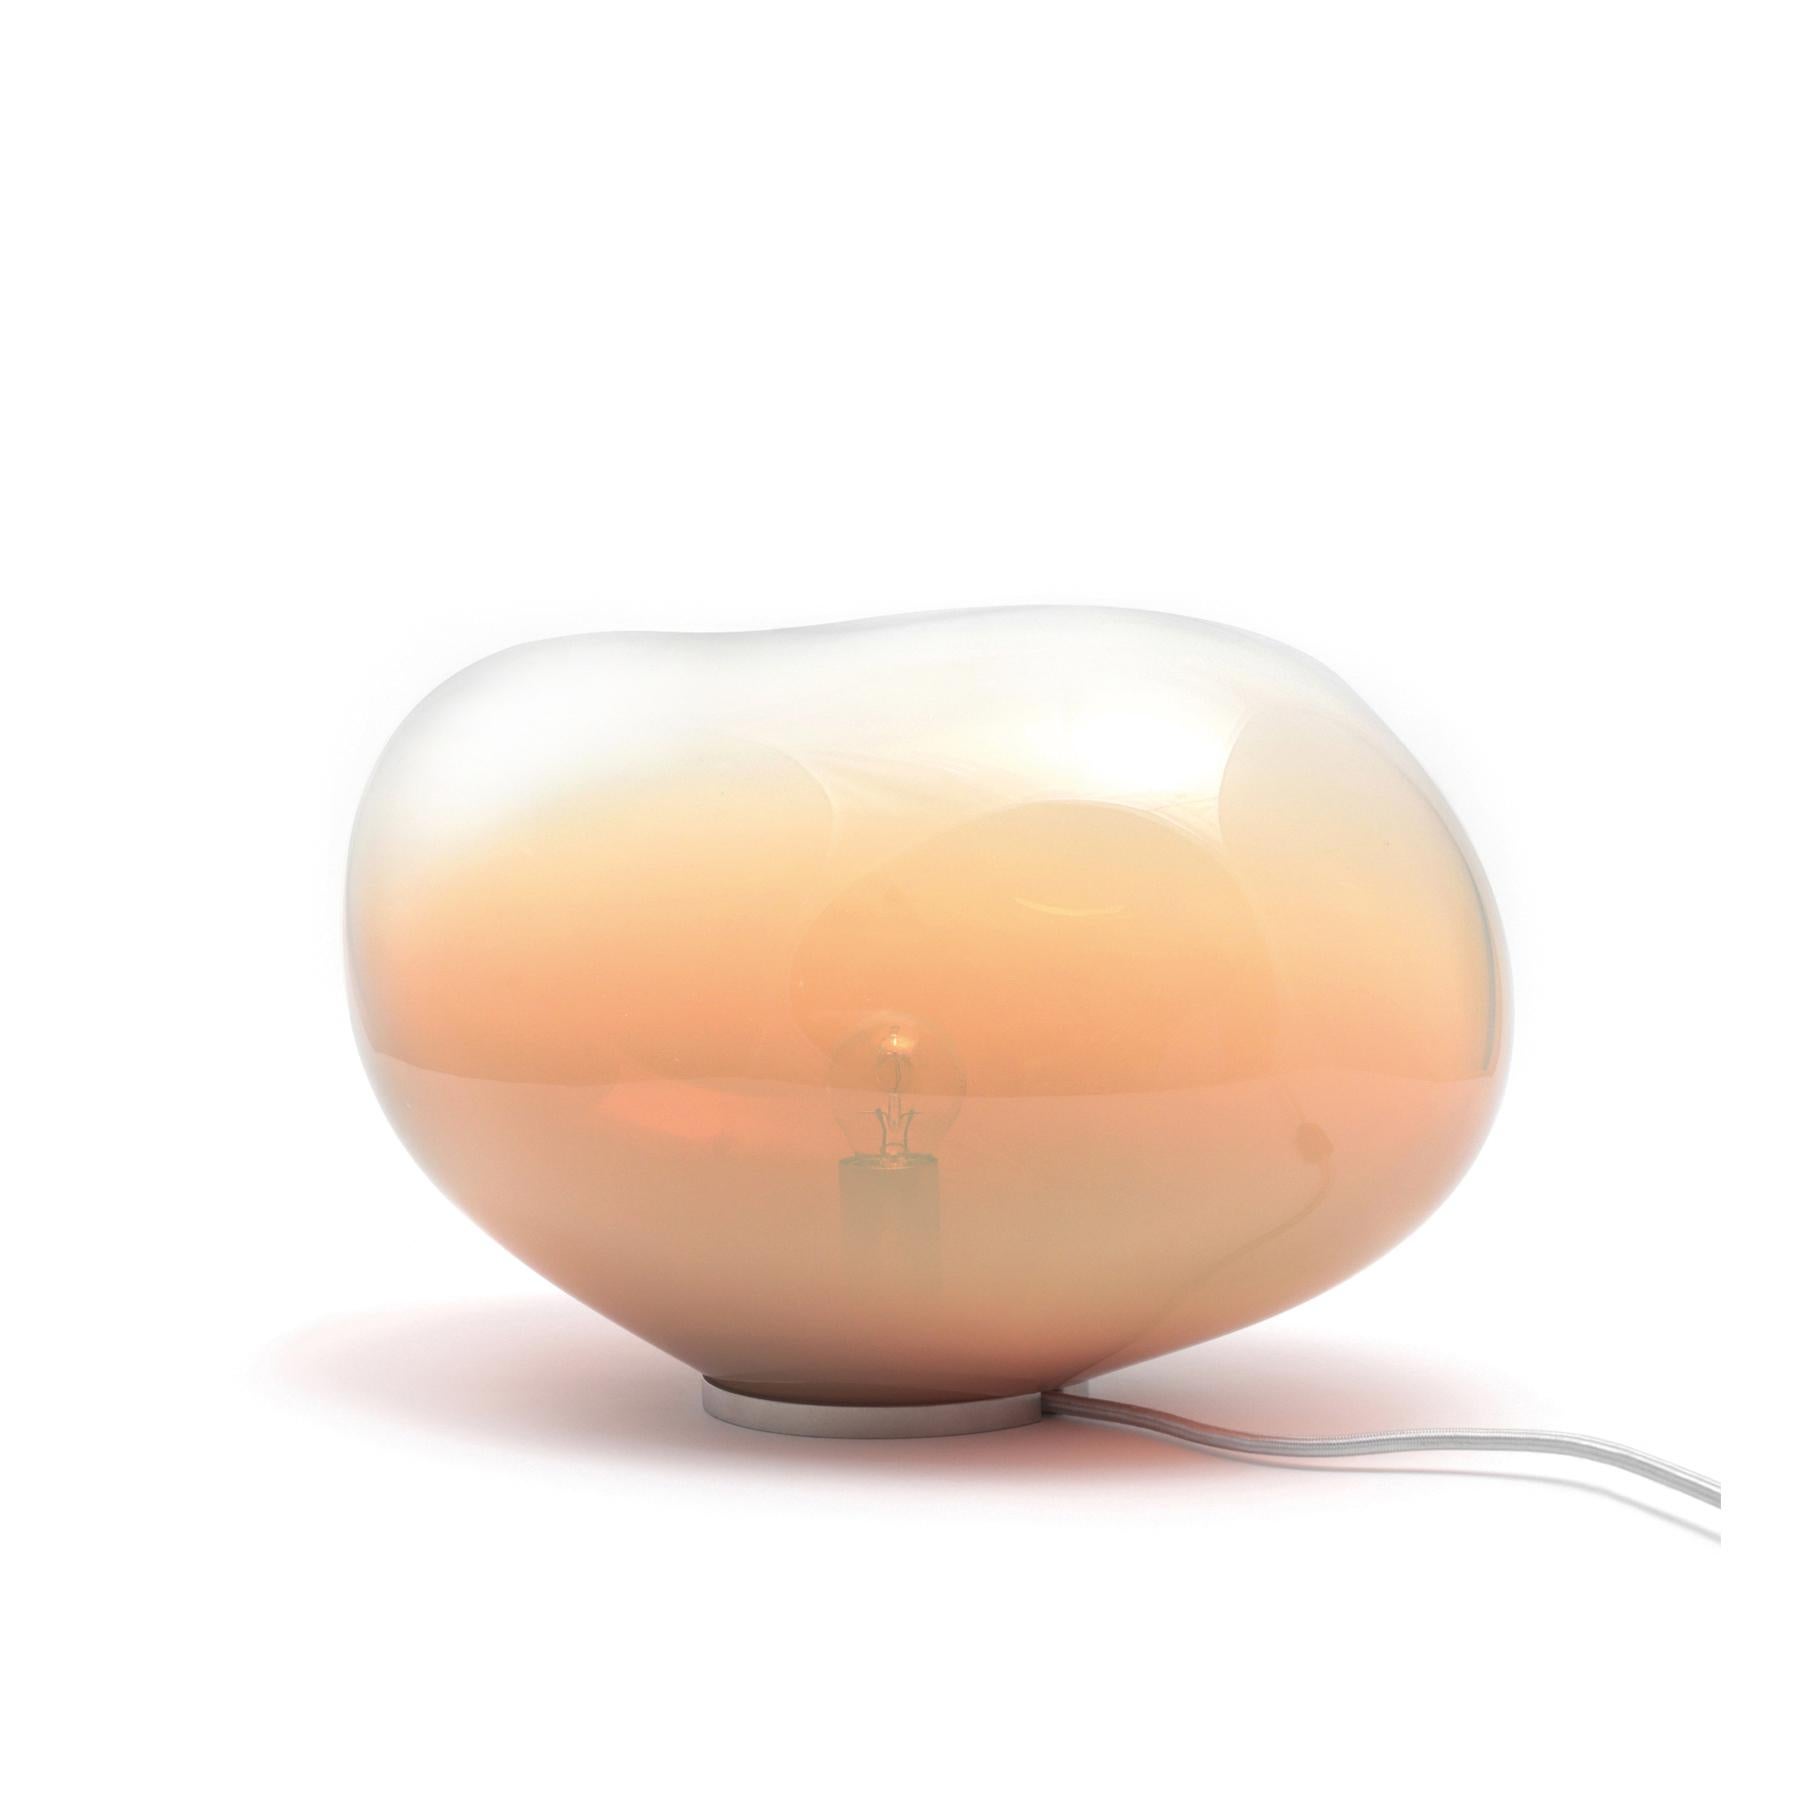 Sedna Amber Iridescent M Table Lamp by ELOA
No UL listed 
Material: Glass, Steel, Silver, LED Bulb.
Dimensions: D 25 x W 38 x H 28 cm.
Also available in different colours and dimensions.

All our lamps can be wired according to each country. If sold